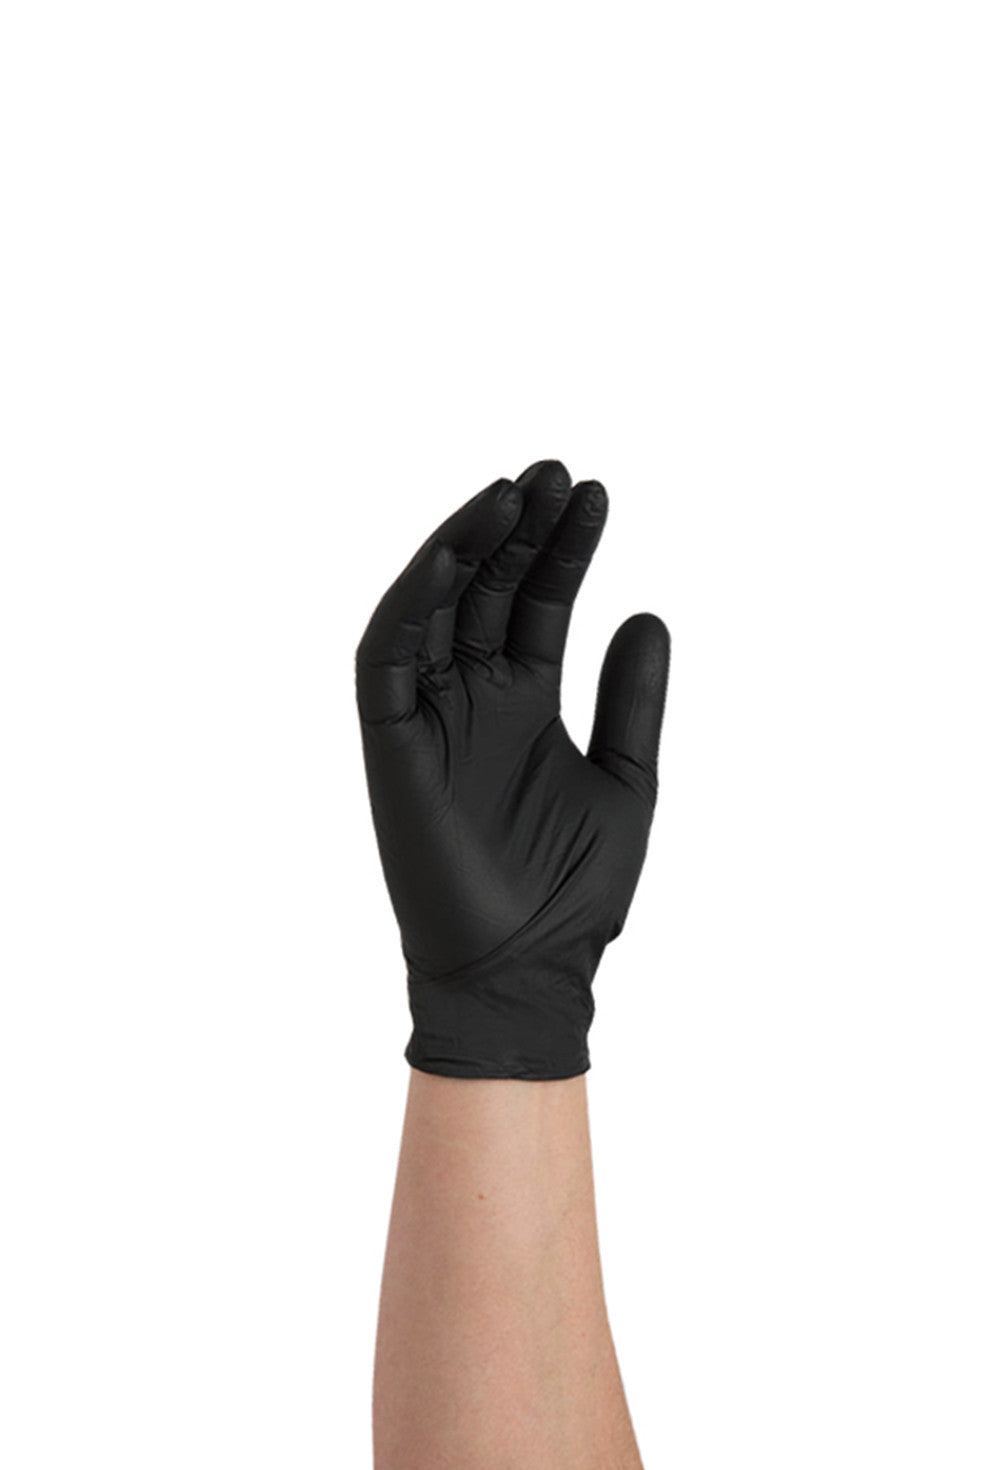 Hey guys! I've been using these gloves for awhile, but everytime I